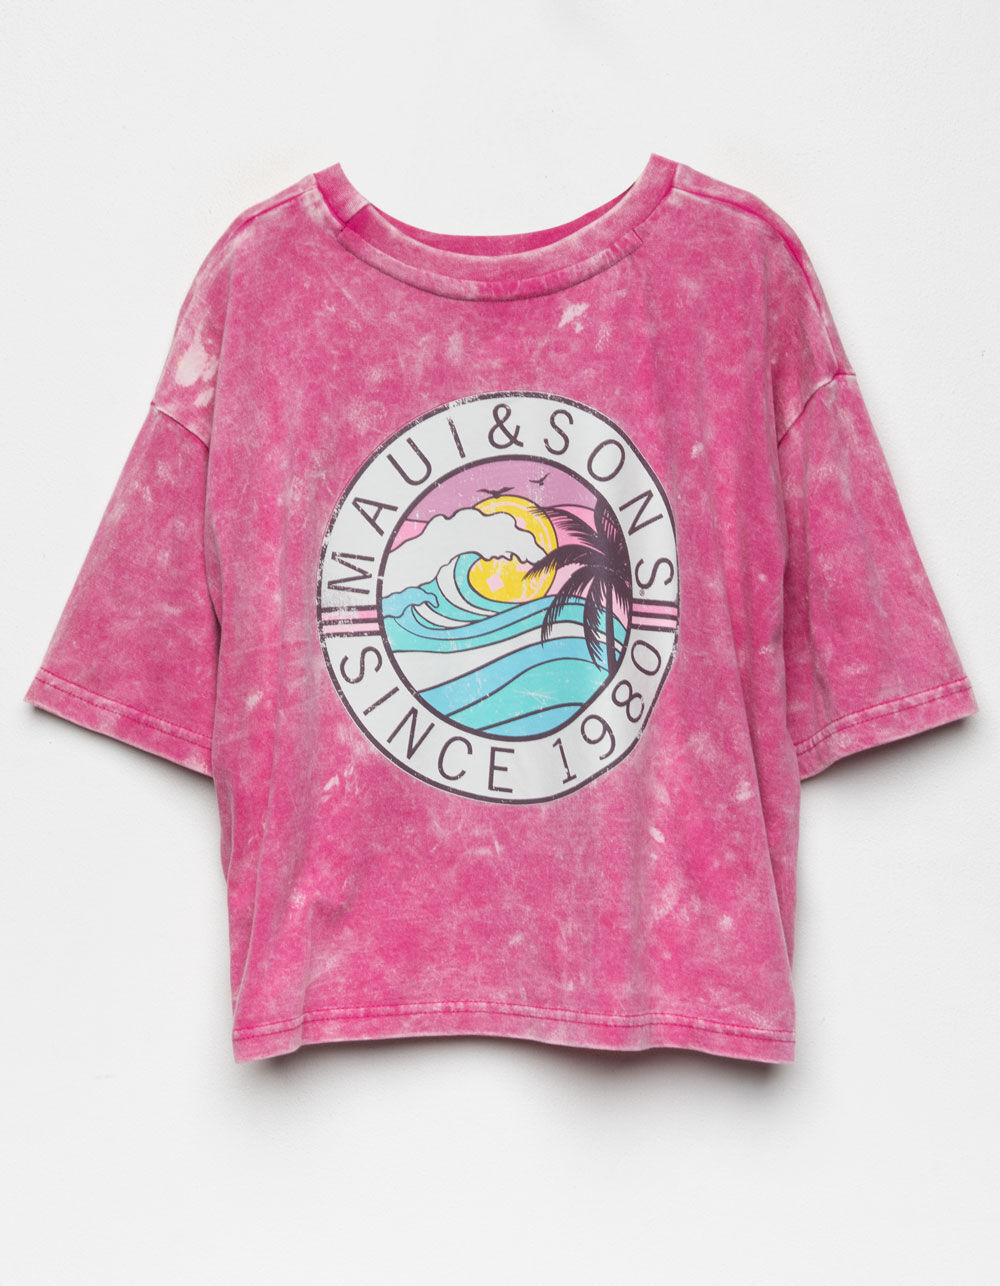 MAUI AND SONS Mineral Wash Boxy Girls Crop Tee - PINK COMBO | Tillys